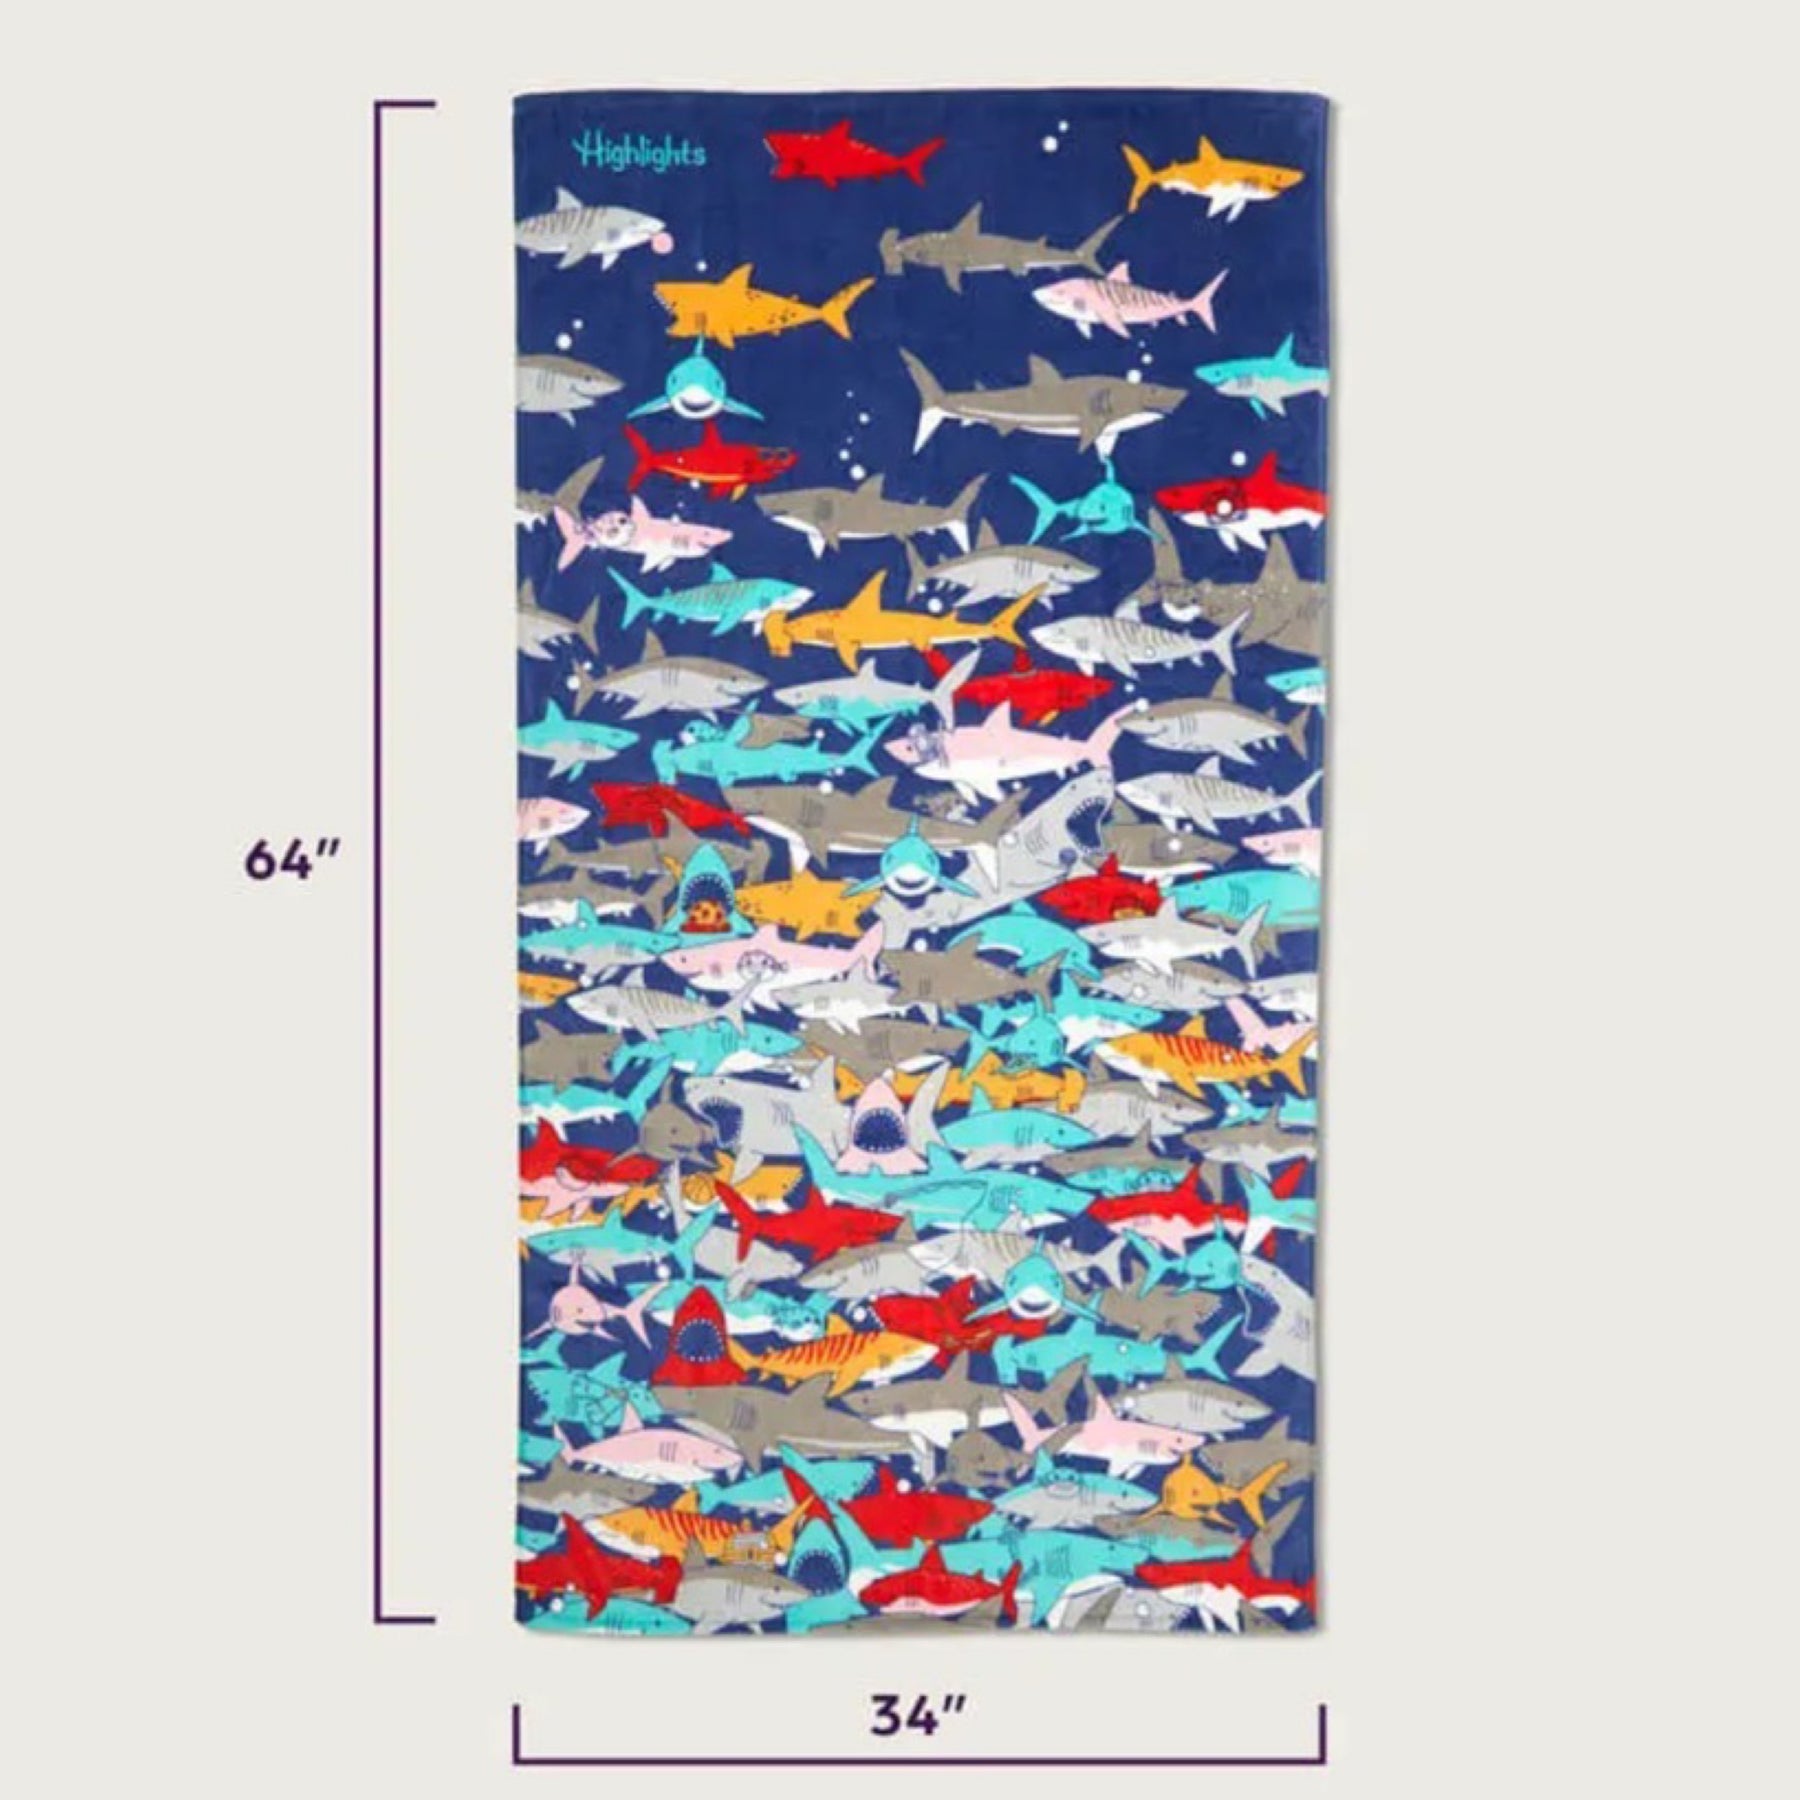 64" Fin-Tastic Shark 100% Cotton Beach Towel by Highlights - Puzzle on Towel!